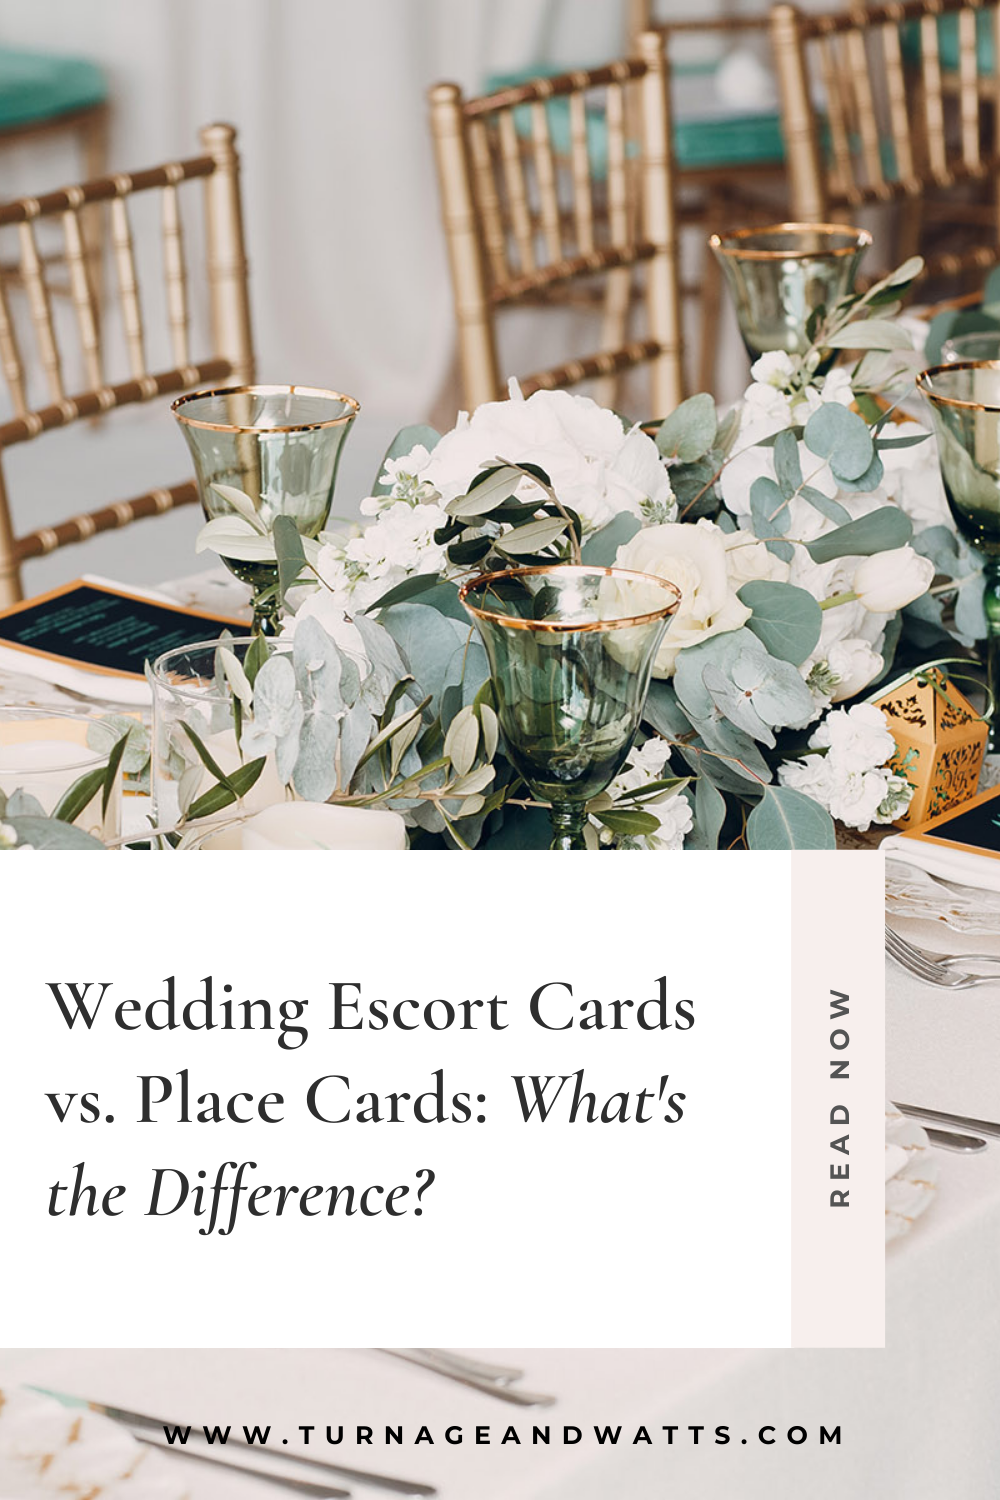 Wedding Escort Cards vs. Place Cards: What's the Difference?